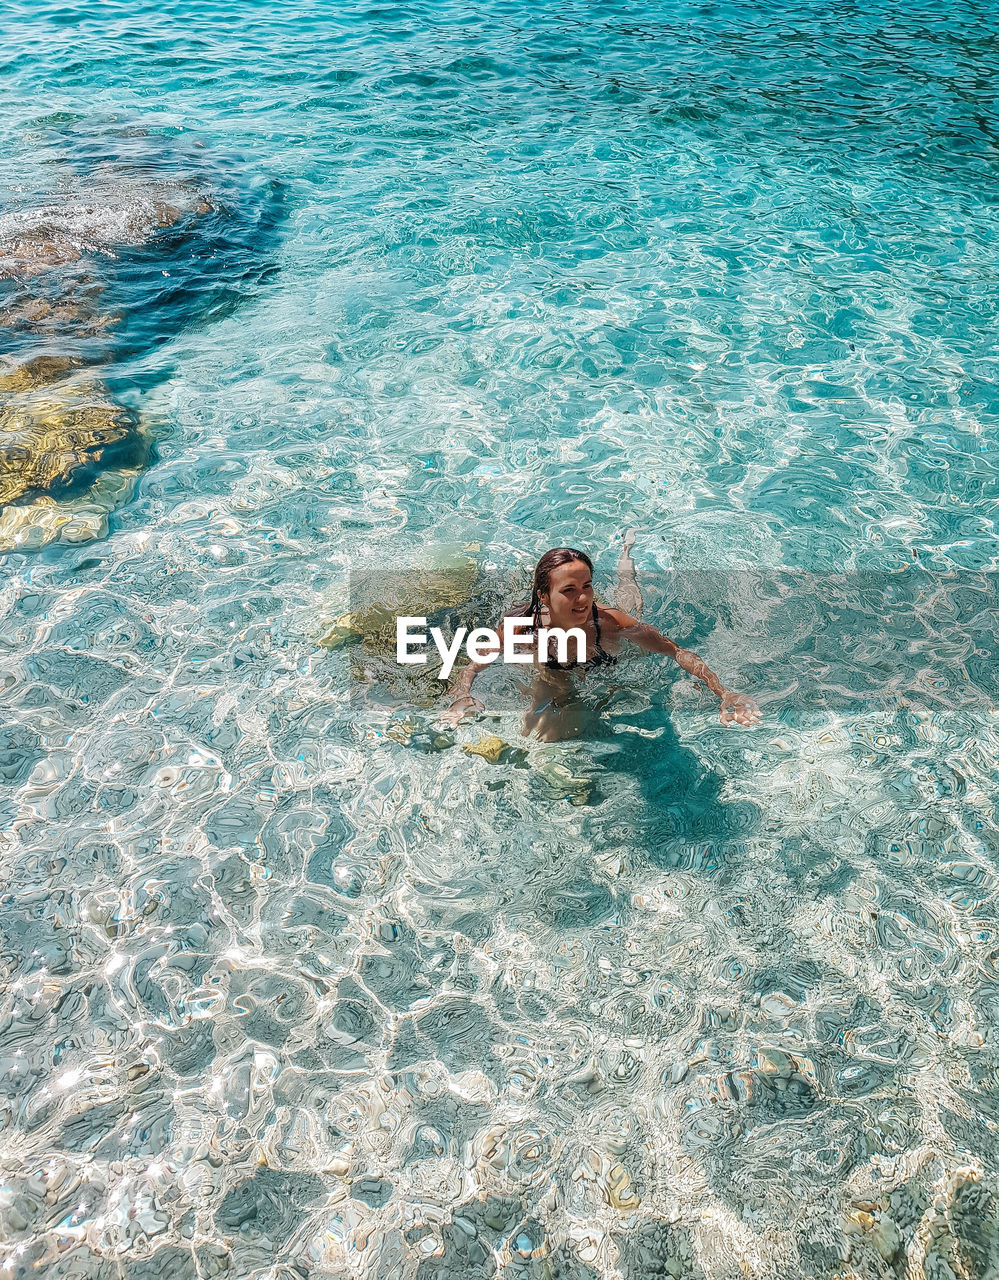 Young woman swimming in transparent water. sea, summer, beach.